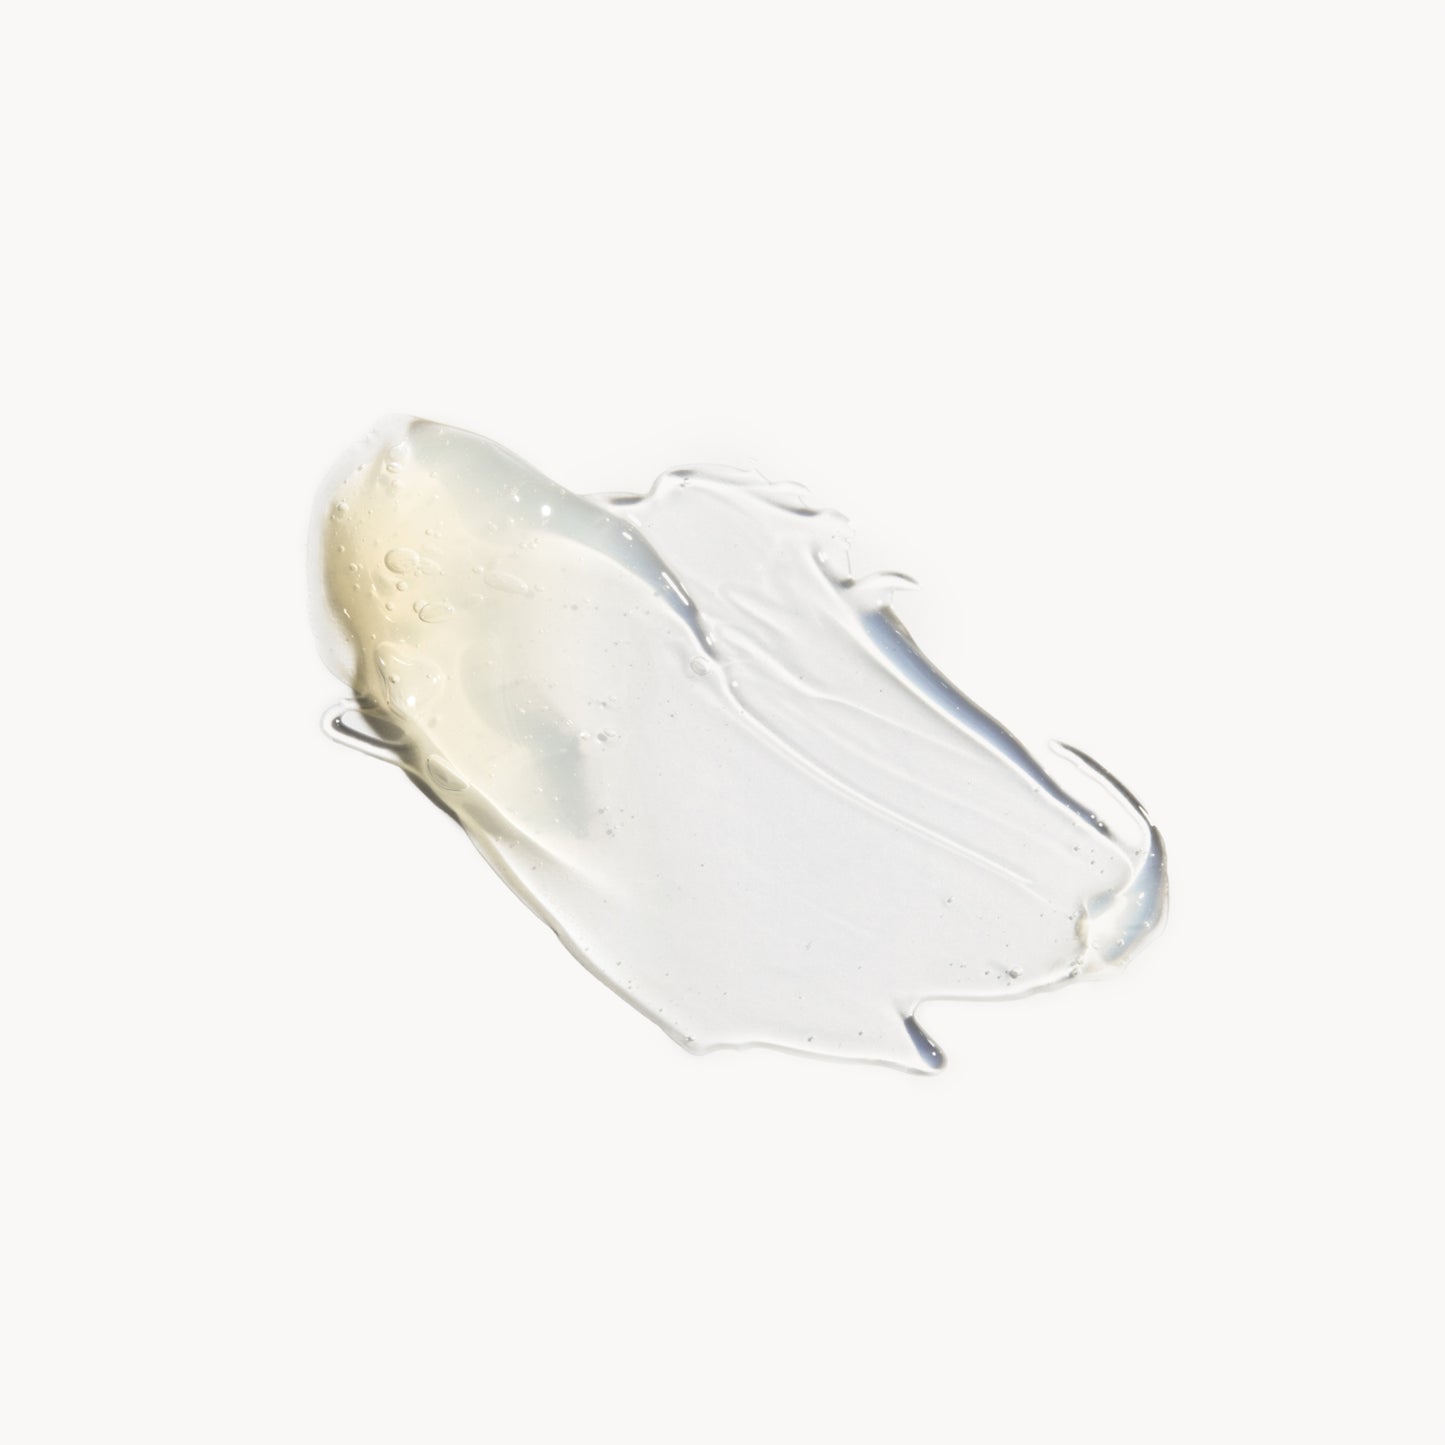 A deposit of cleanser on a white background. The product is gold-coloured, turning clear when it is thinned out.